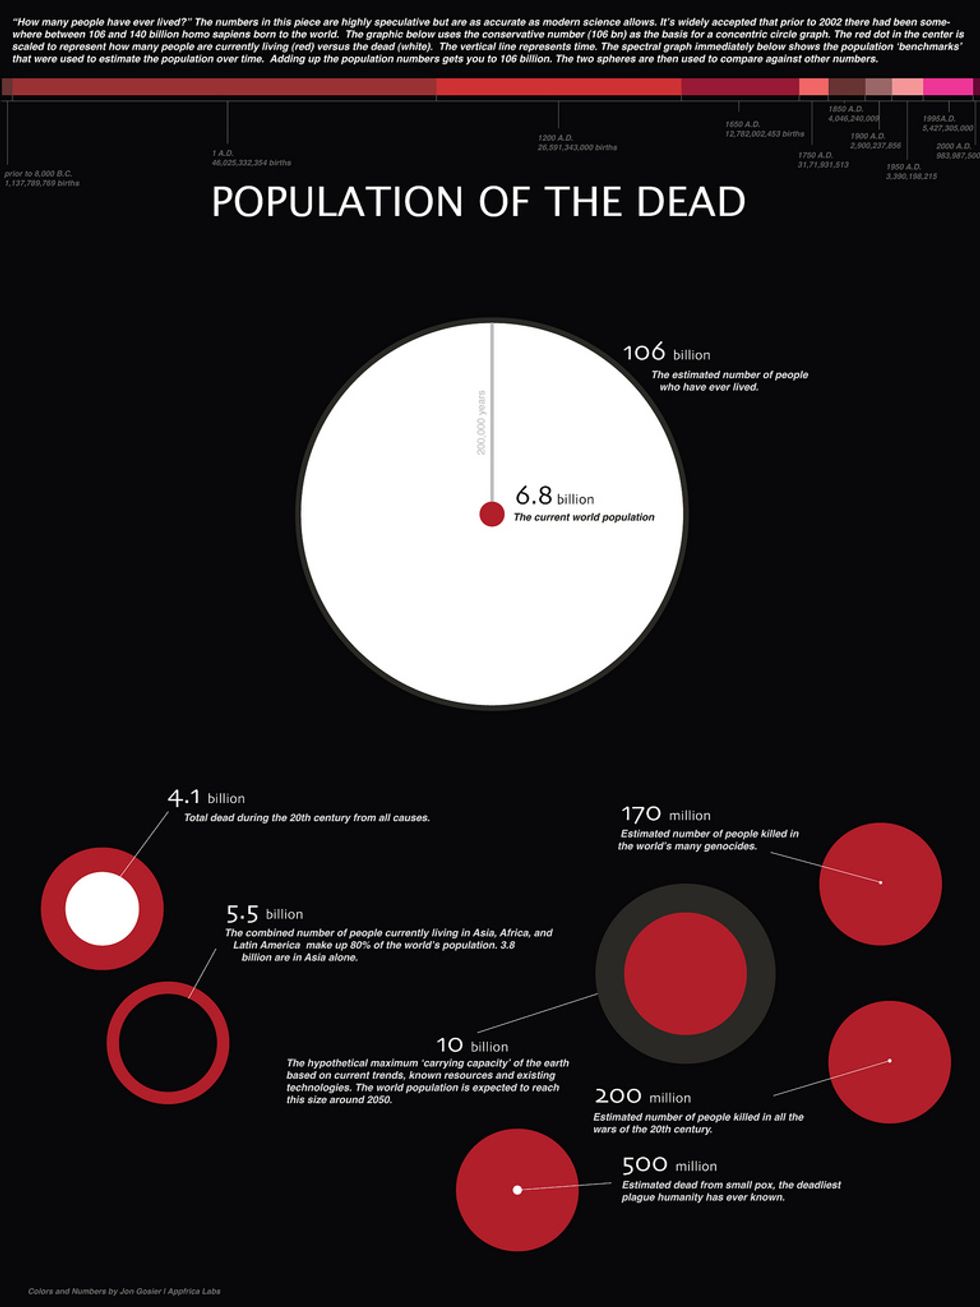 The Population of the Dead: How Many People Have Ever Lived?